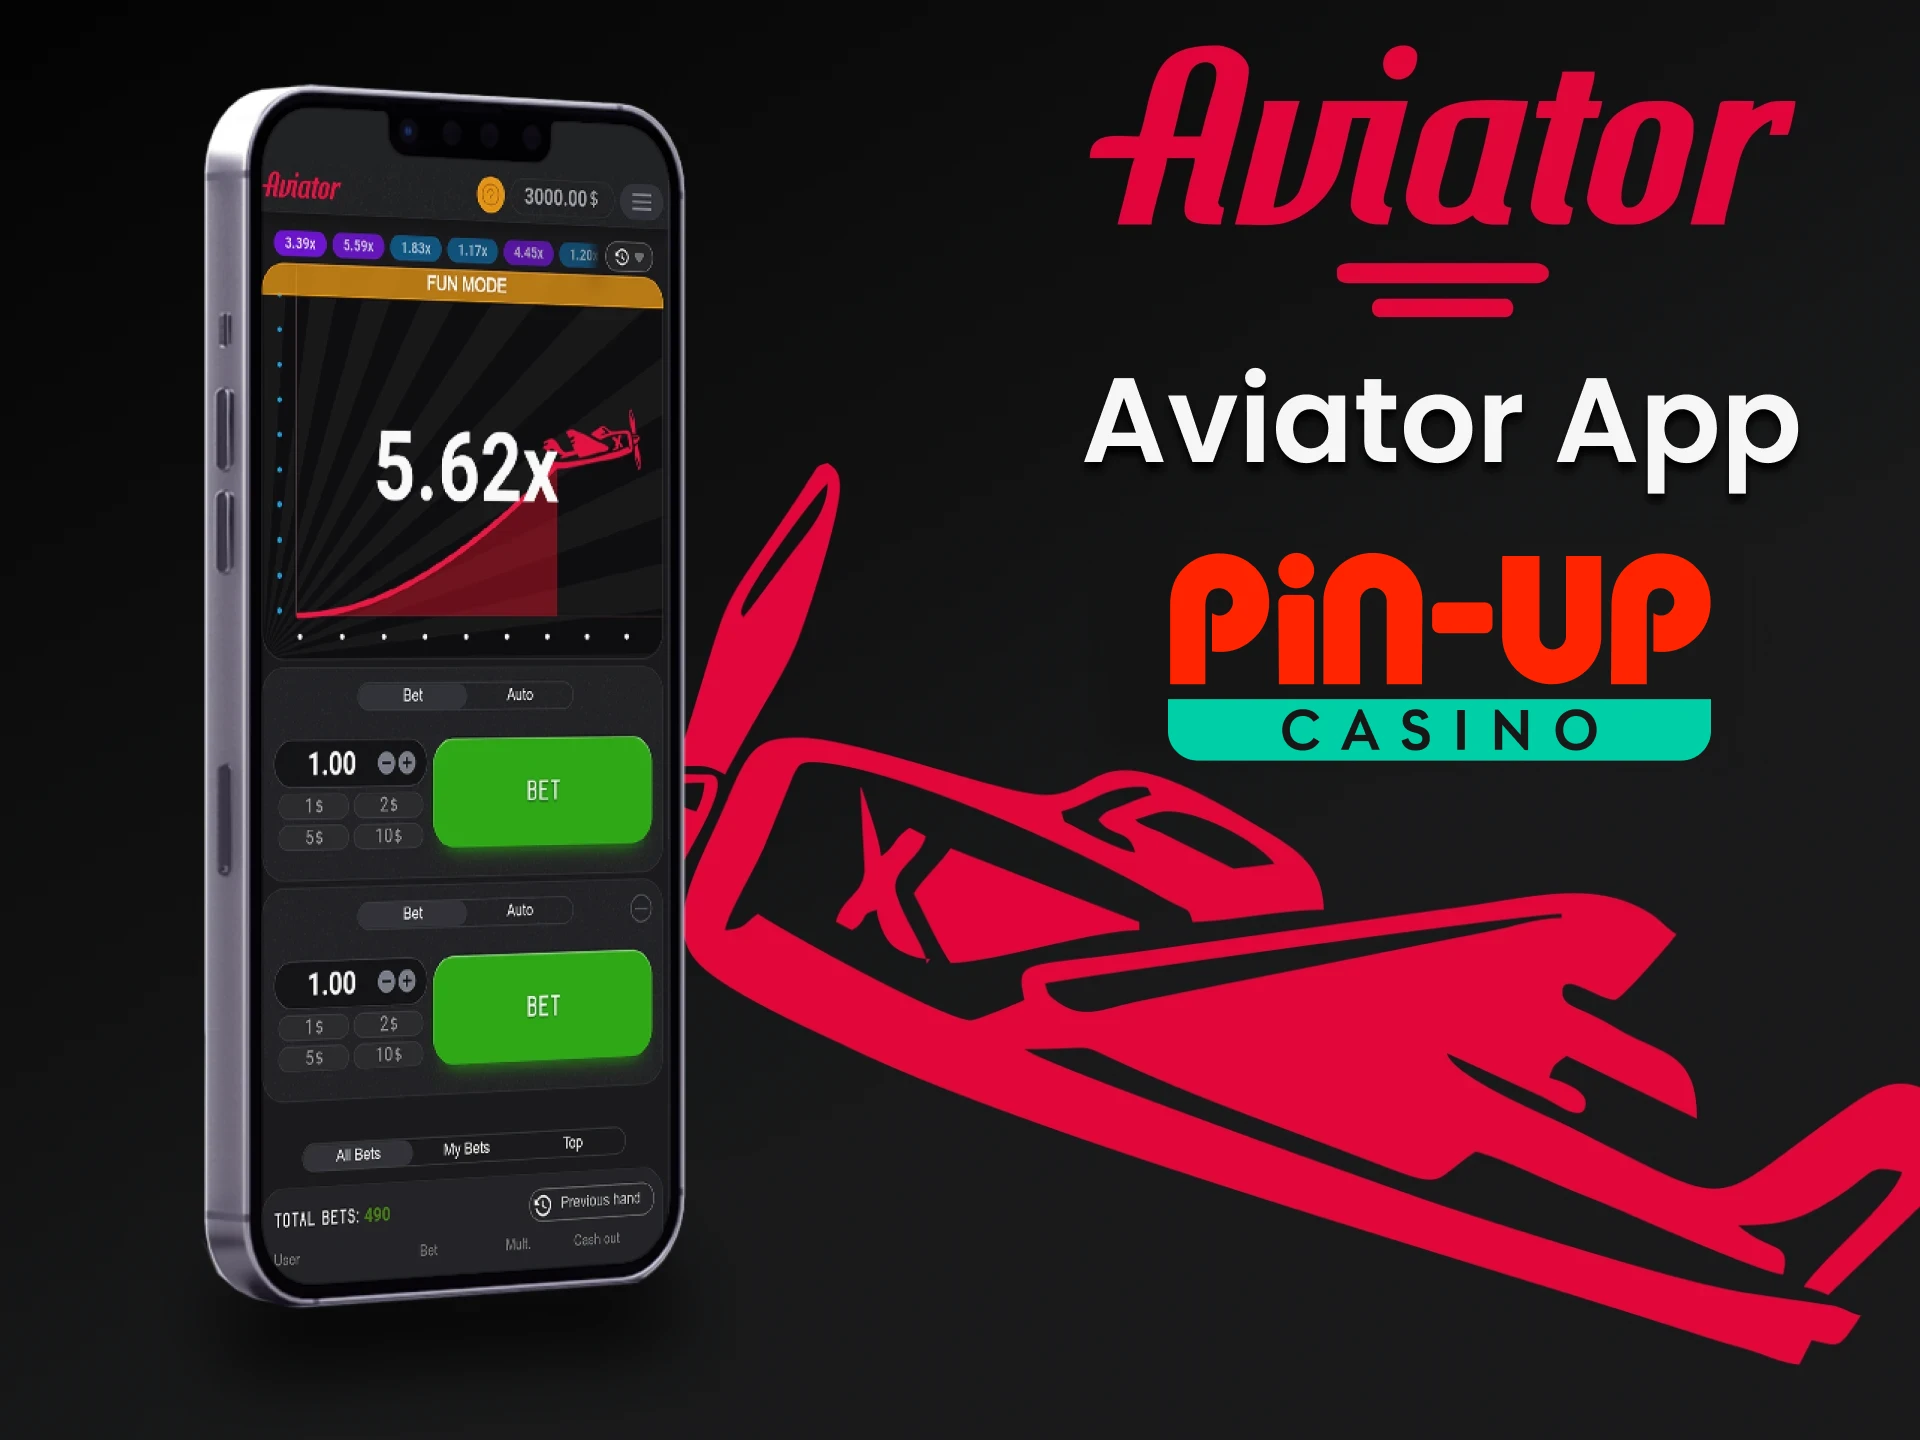 Play the Aviator game with the PinUp app.